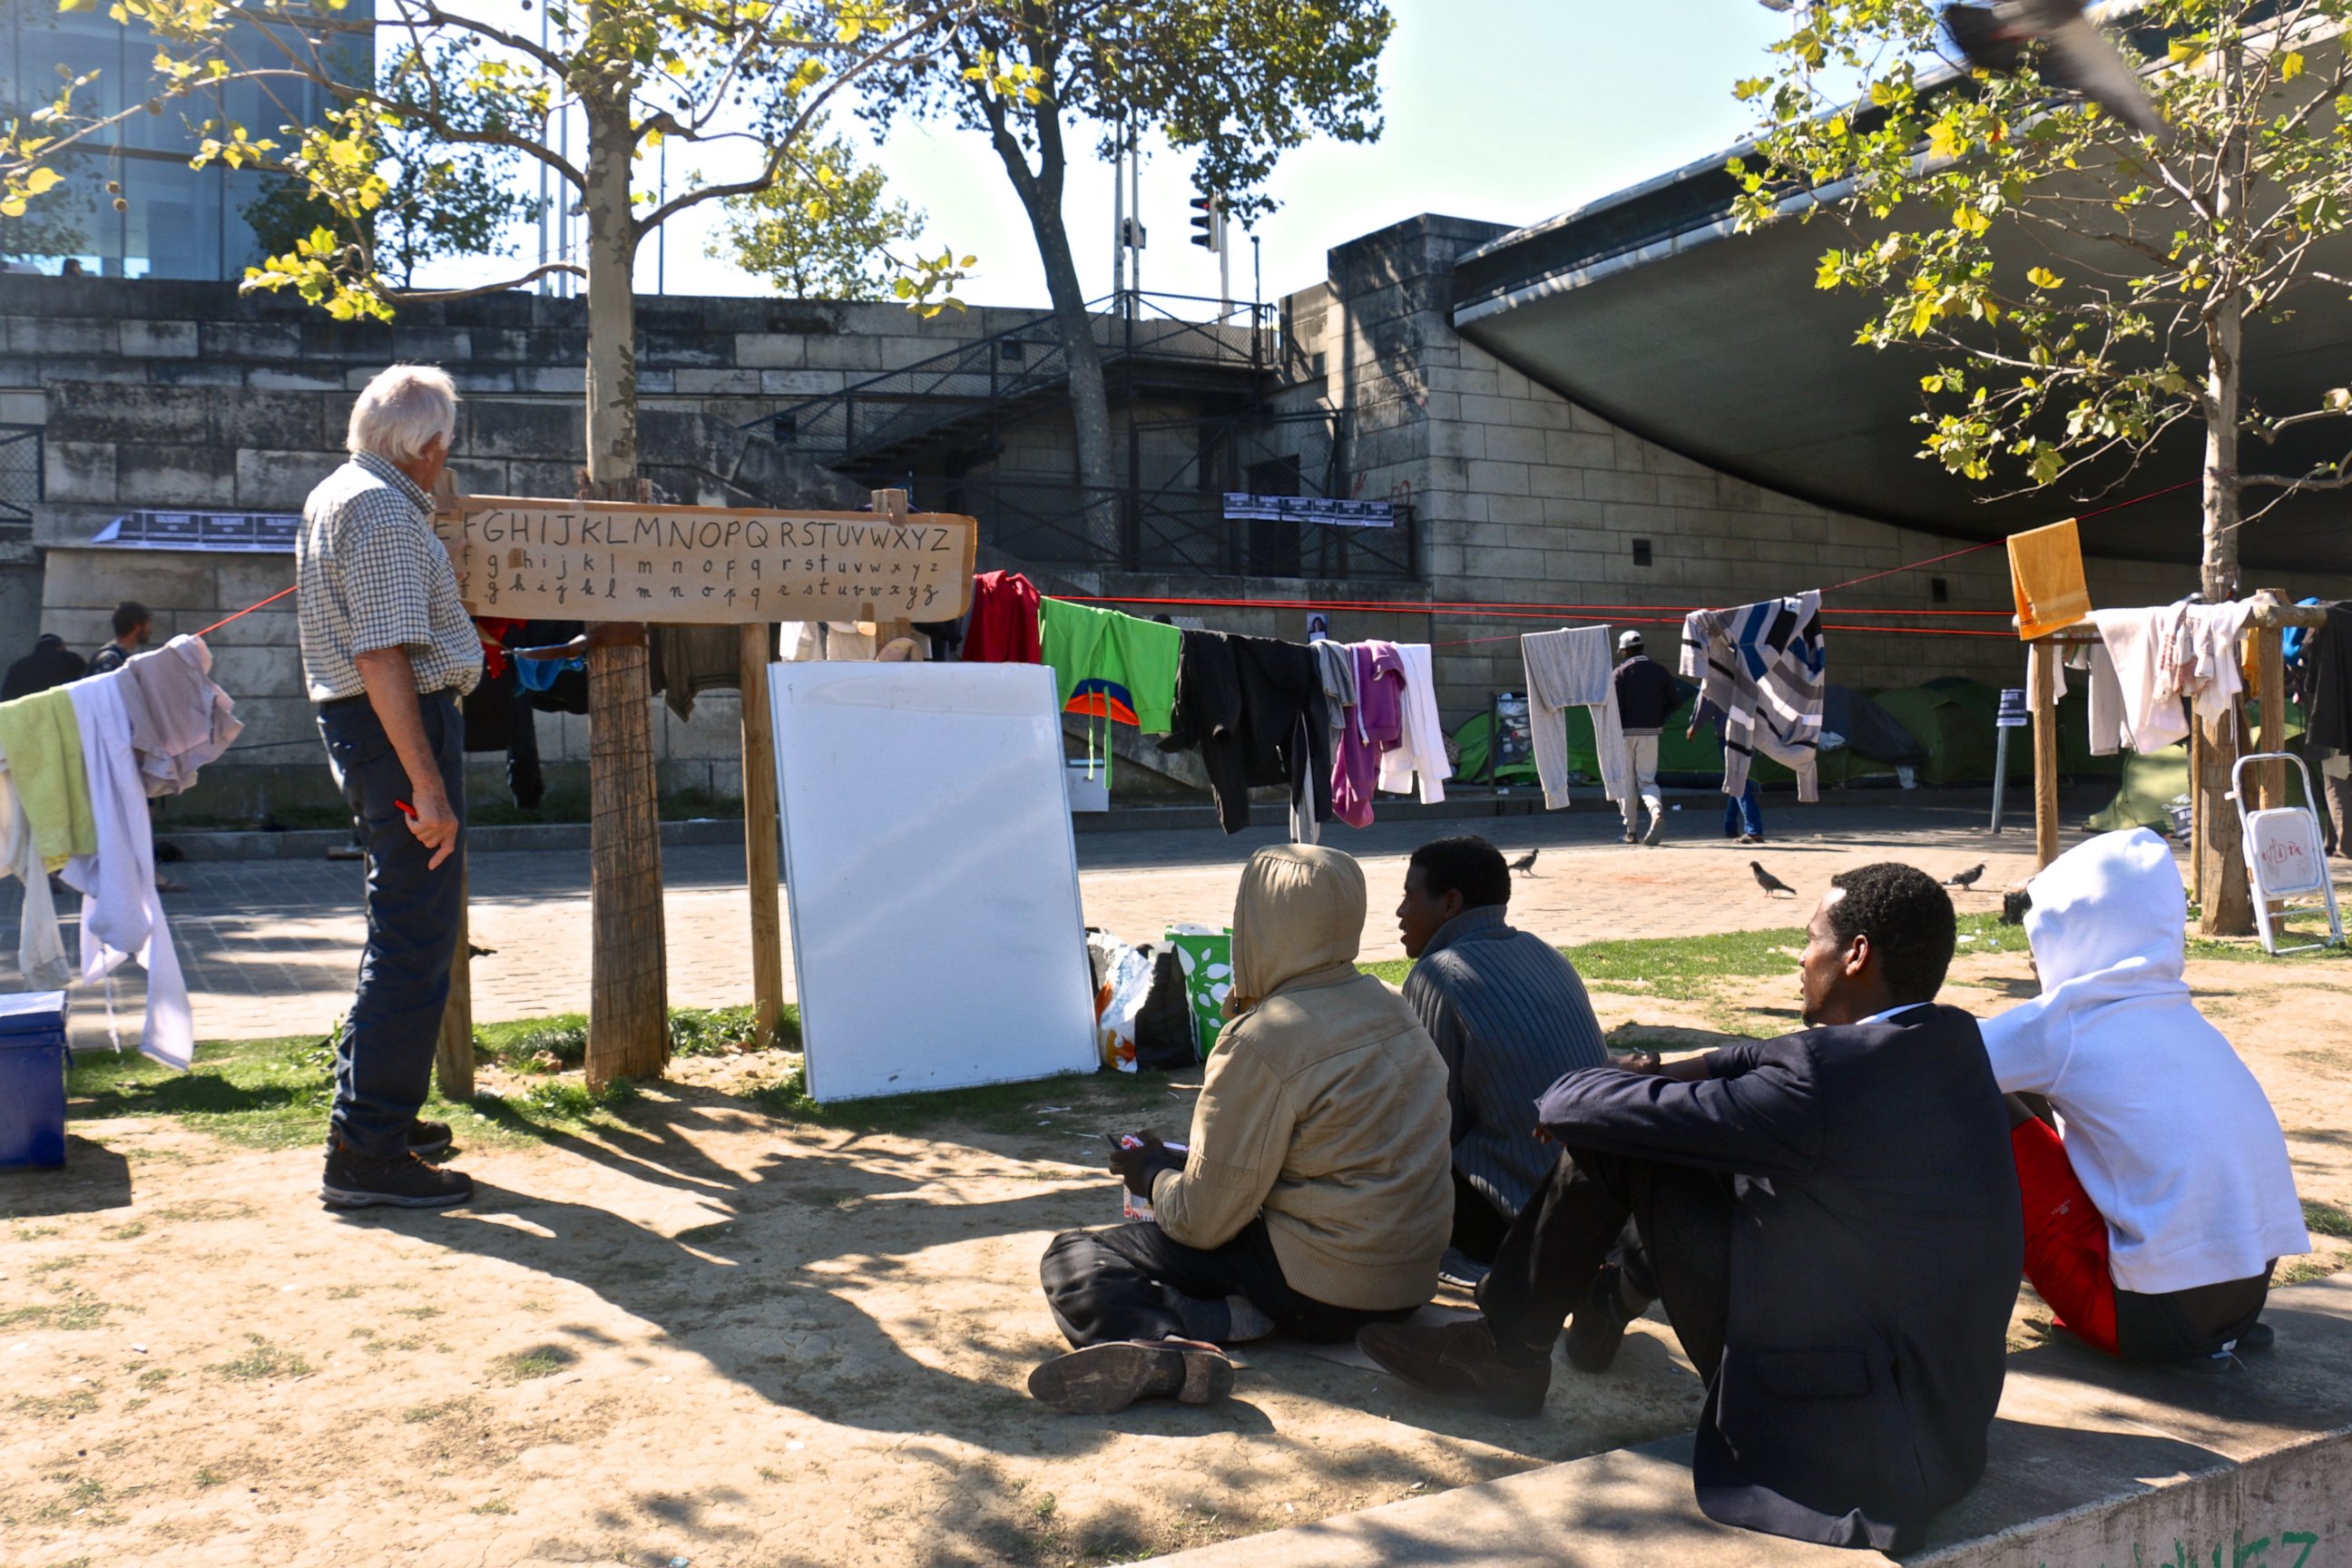 PHOTO: A volunteer teaches French to migrants and refugees living in tents at Austerlitz, near the Seine River in Paris, Sept. 10, 2015.